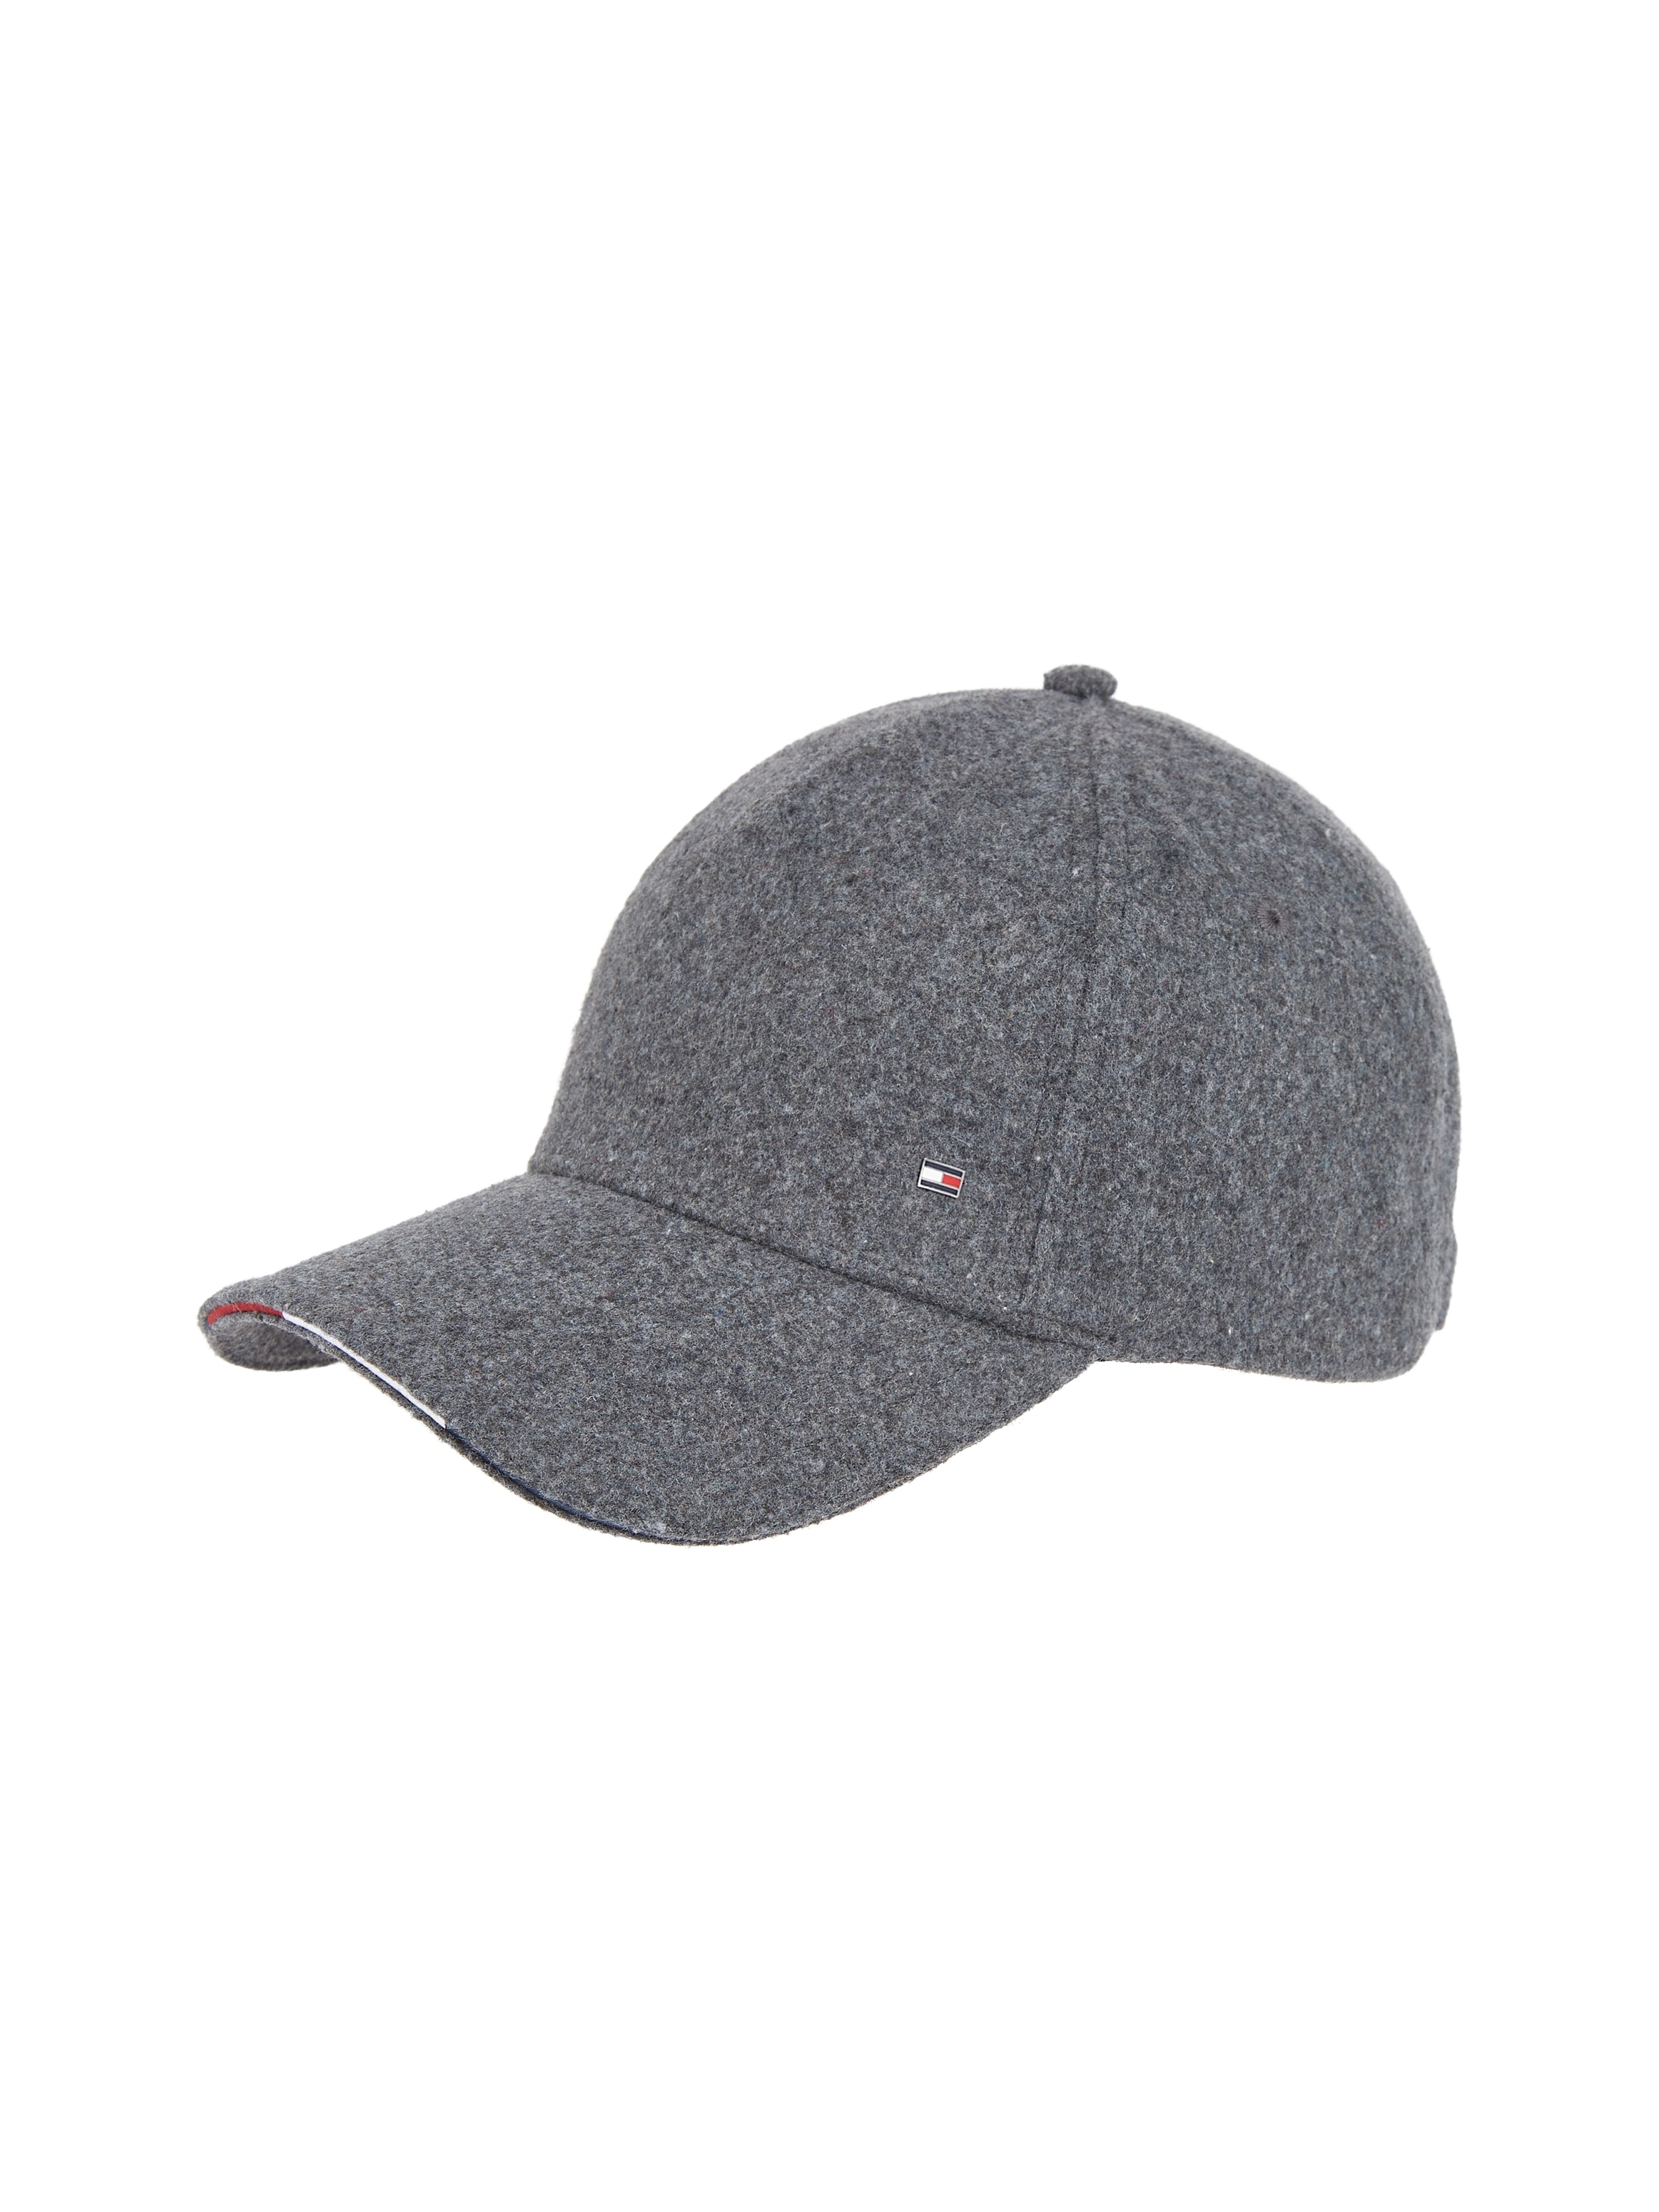 Baseball »ELEVATED Tommy Flag und UNIVERSAL Tommy- Cap Tape online mit CORPORATE CAP«, bei Hilfiger